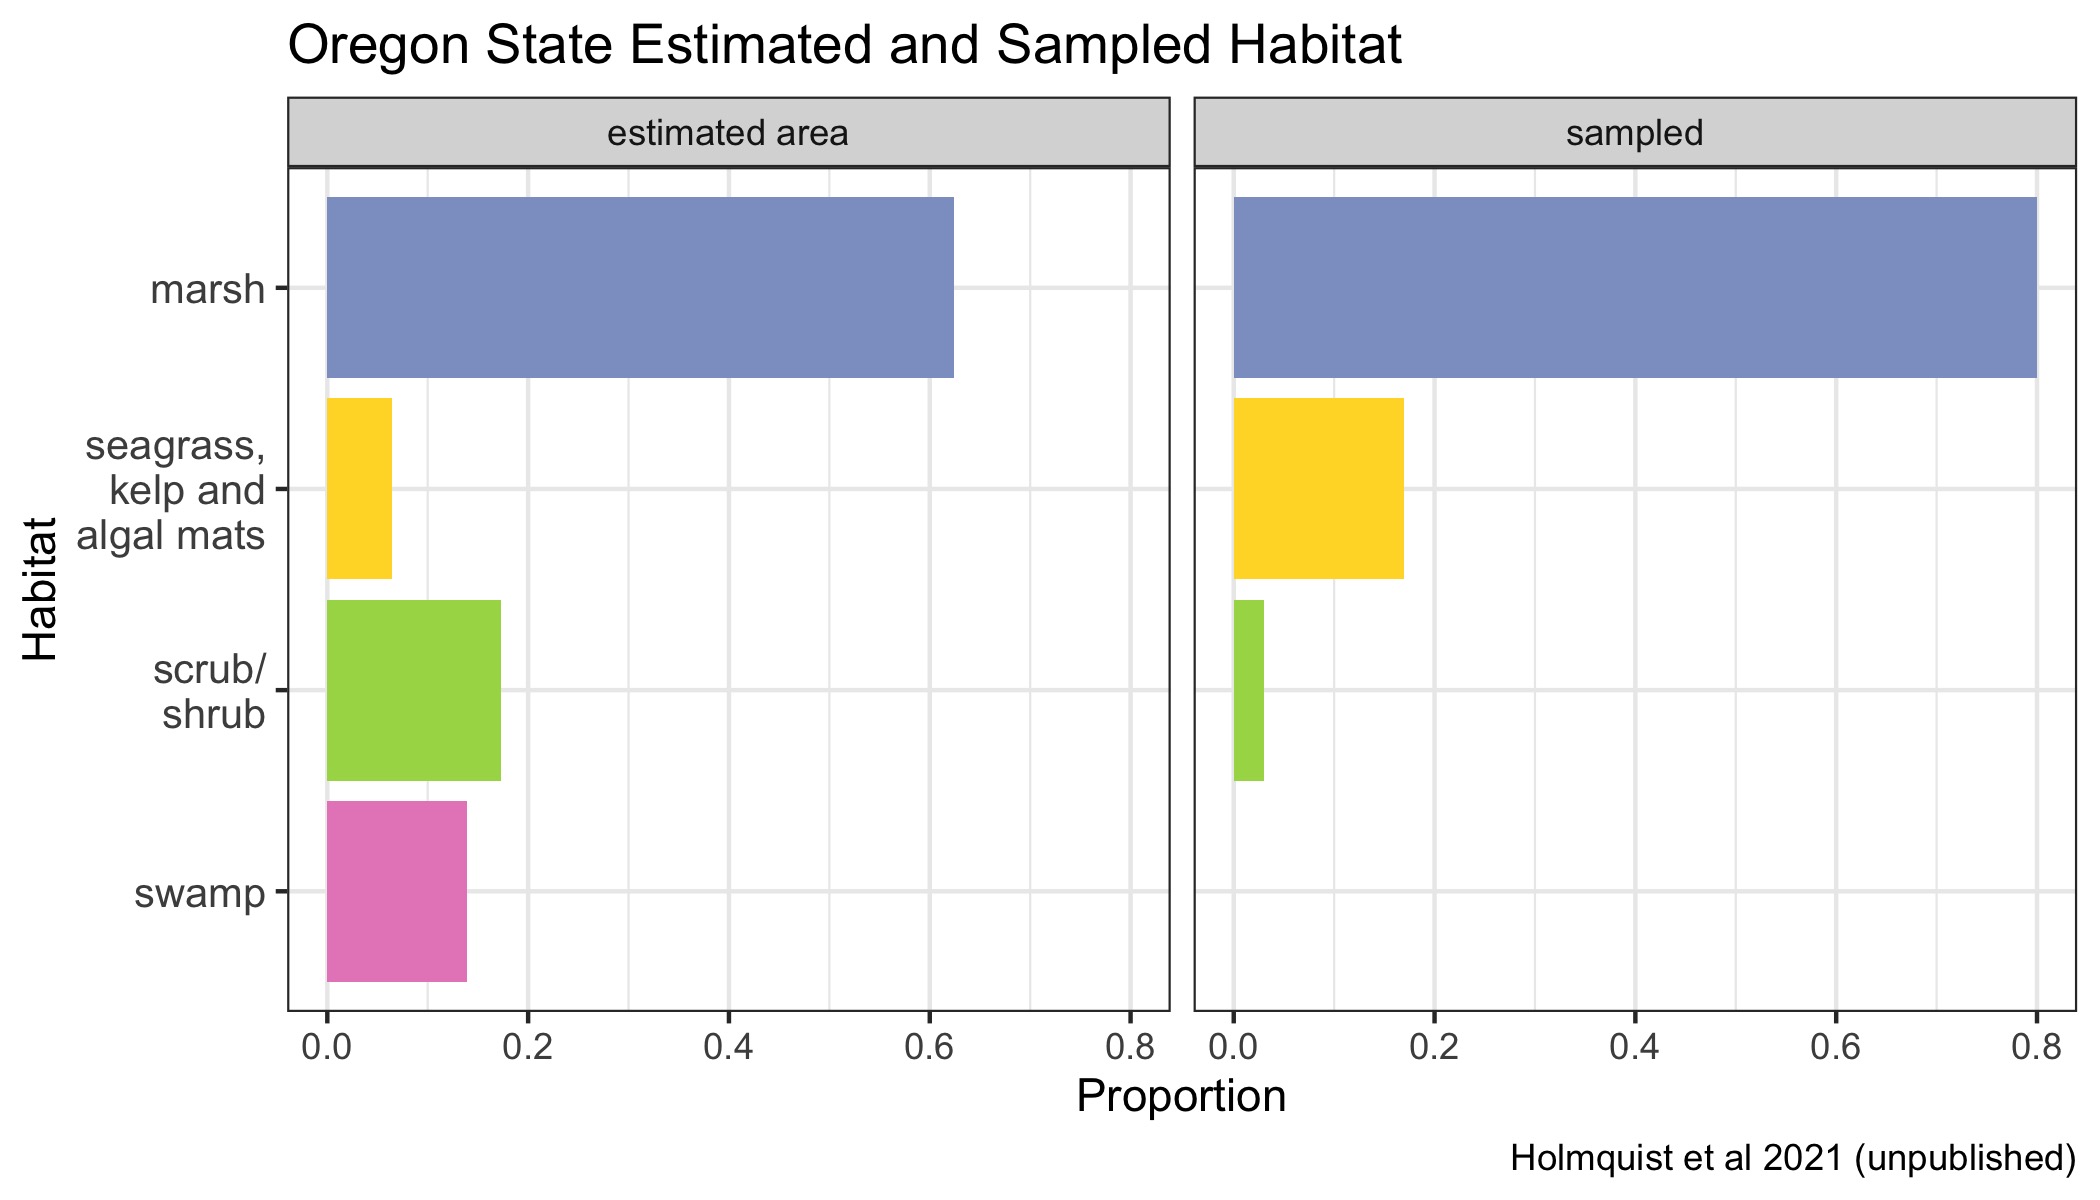 Proportions of various Blue Carbon habitats across Oregon state represented in the dataset in proportion to their estimated area. Seagrasses, kelp beds and algal mats are all combined into a single category, because they are combined in the underlying mapping products.